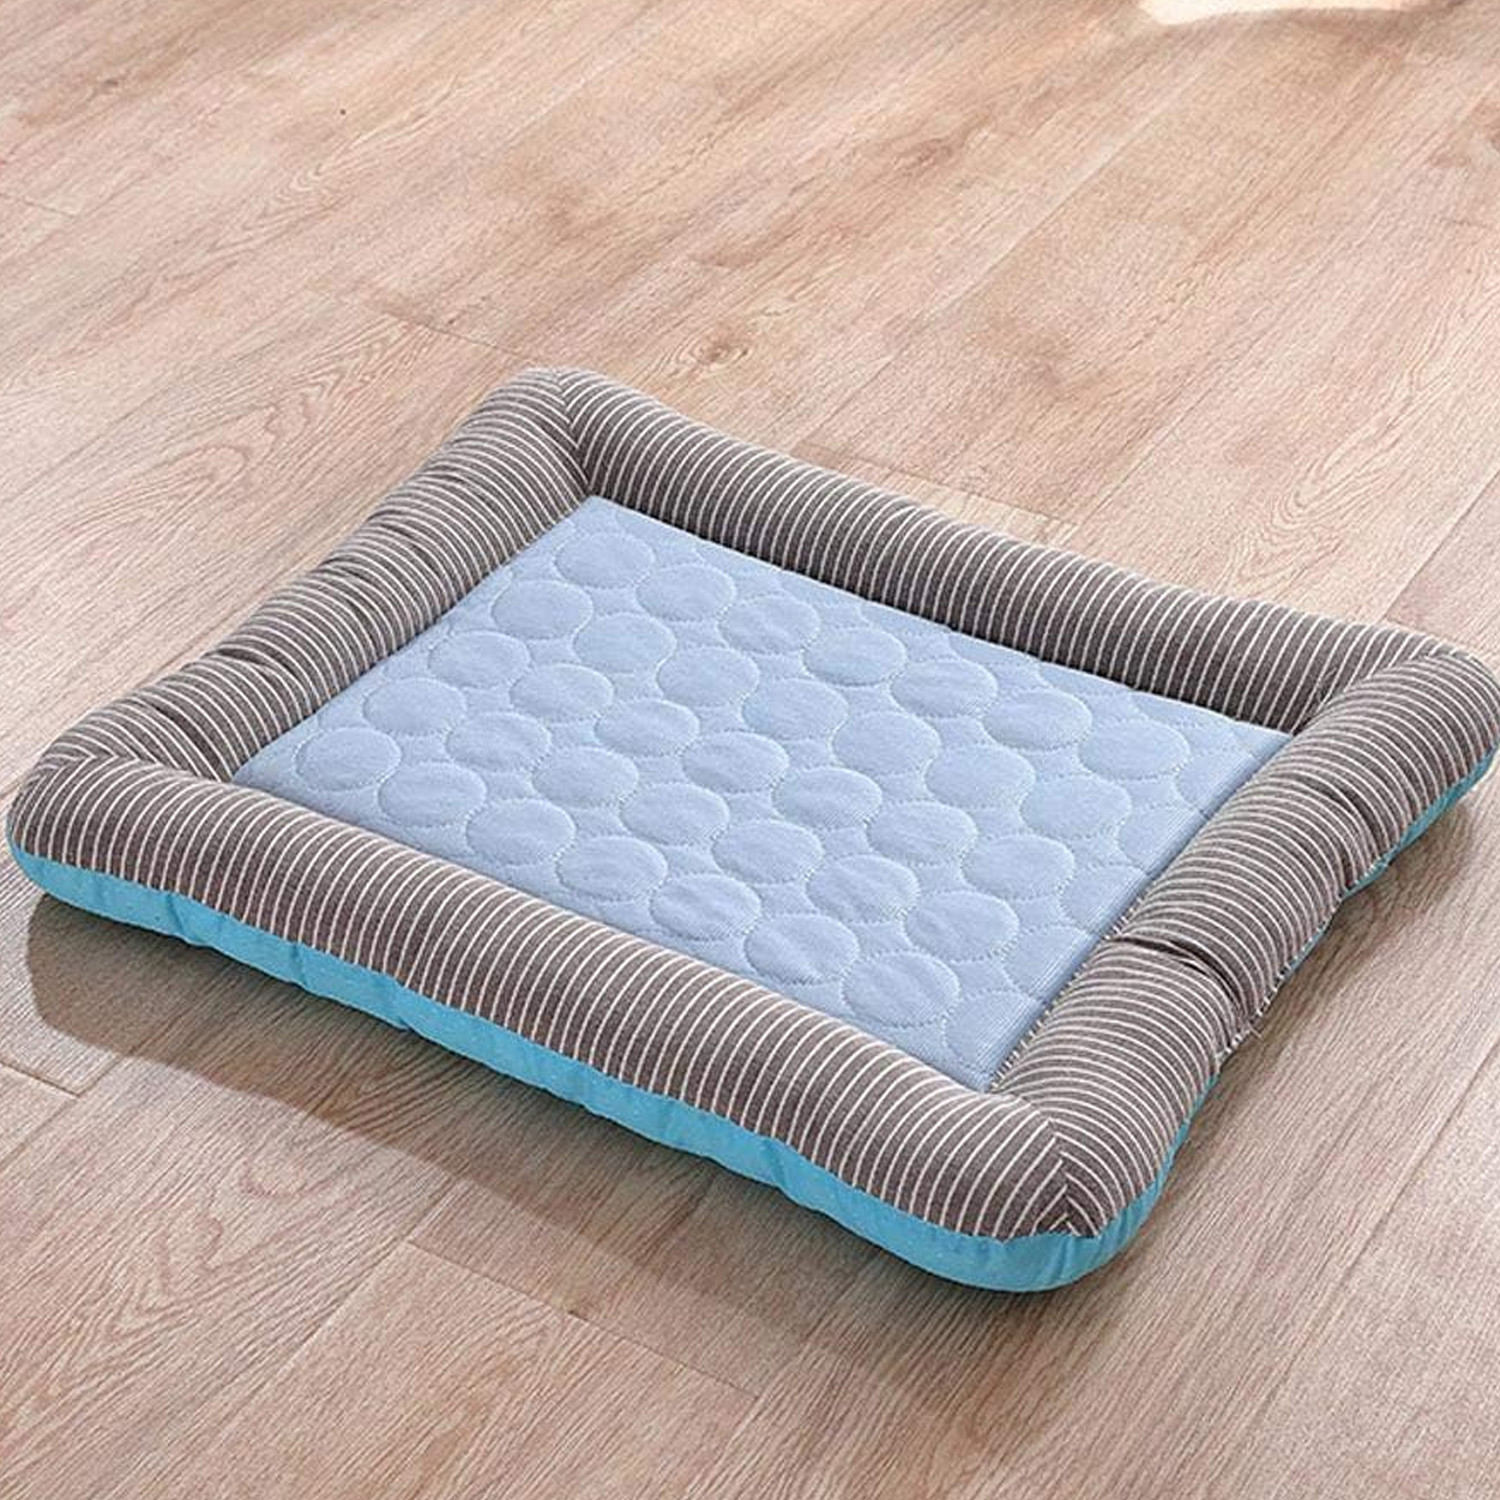 Kuber Industries Rectangular Dog & Cat Bed|Yarn Dyed Oxford Cloth|Nylon and Polyester with Cotton Filling|Self-Cooling Bed for Dog & Cat|Small Light-Weight & Durable Dog Bed|ZQCJ005B-S|Blue